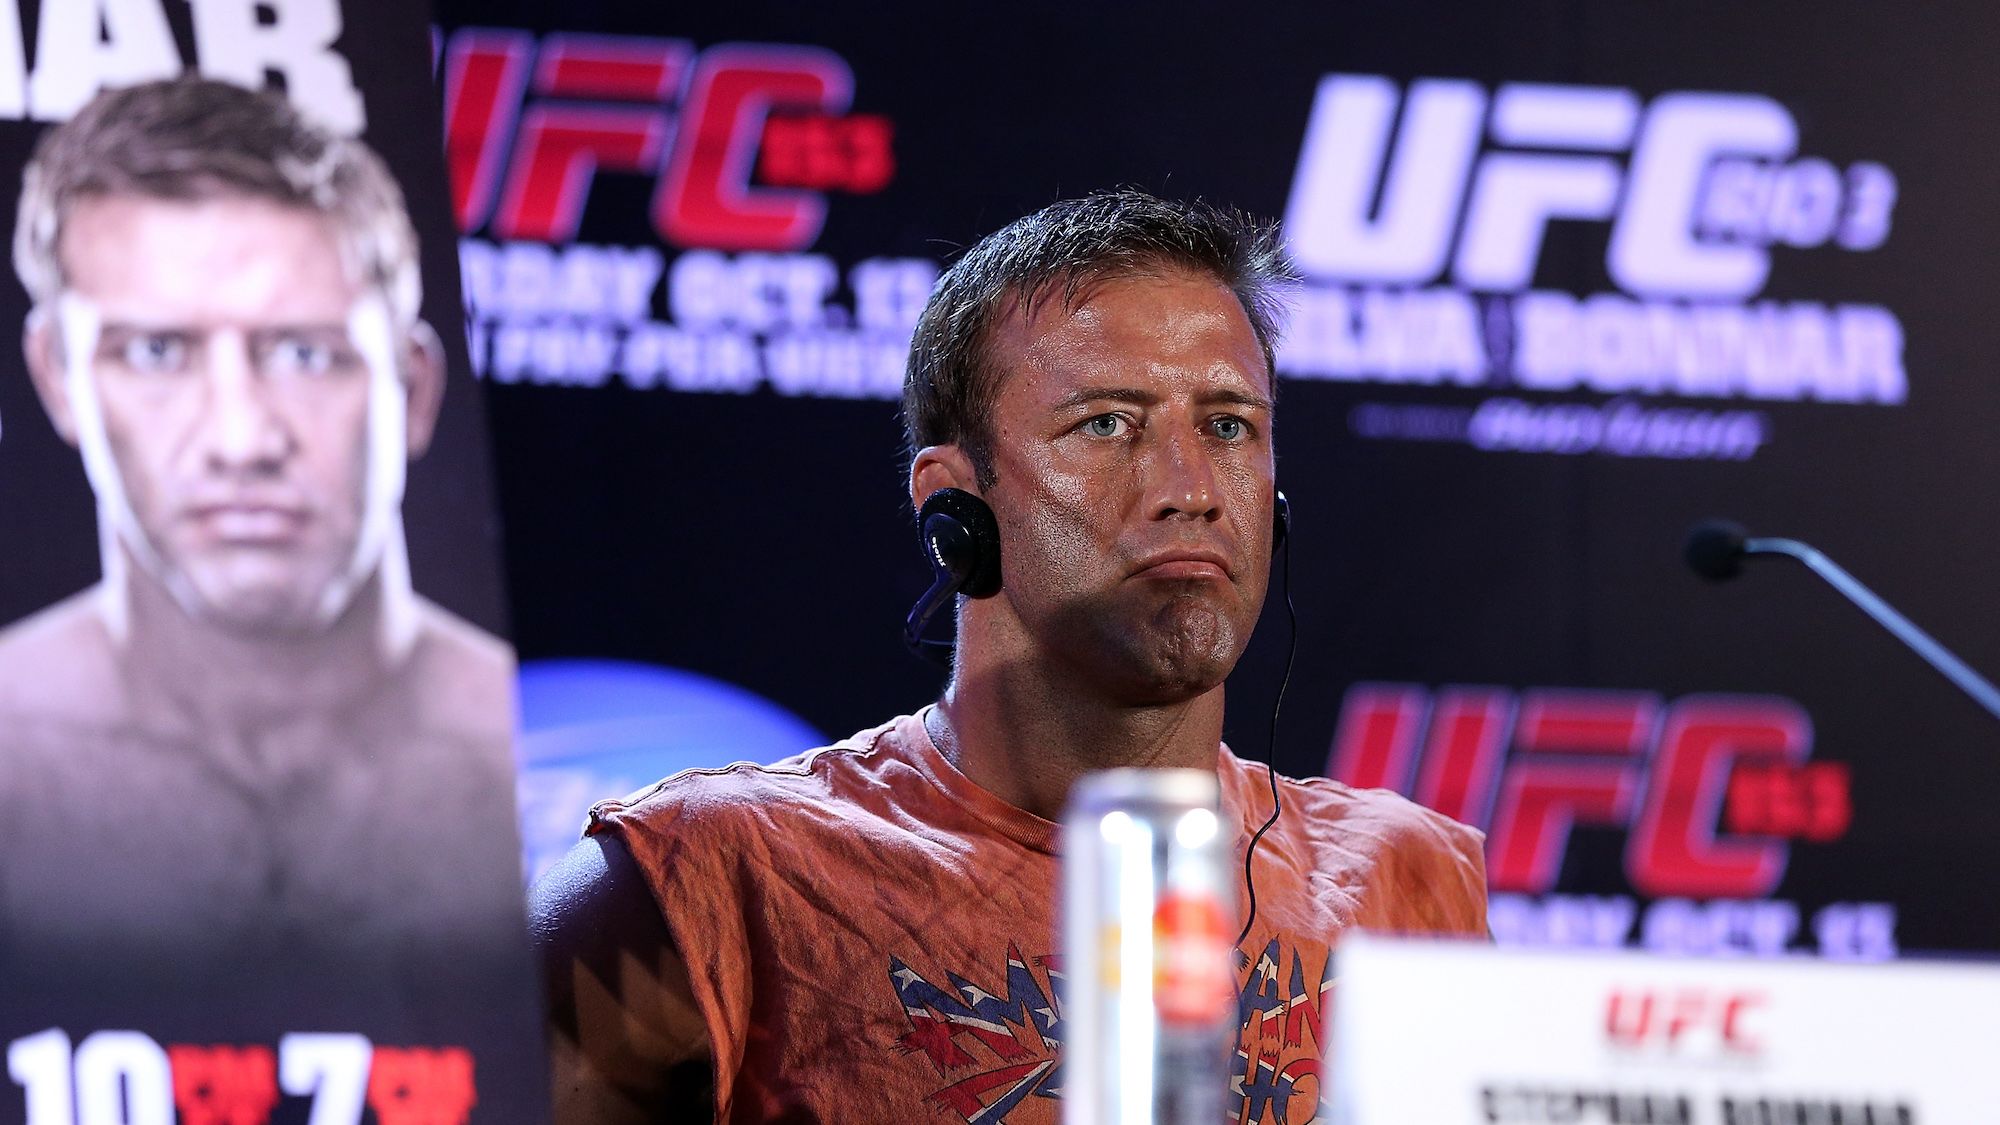 UFC Hall of Famer <a href="https://www.cnn.com/2022/12/25/sport/stephan-bonnar-ufc-death-spt/index.html" target="_blank">Stephan Bonnar</a> died at the age of 45 on December 22. Bonnar died from "presumed heart complications while at work," the UFC said in a news release.